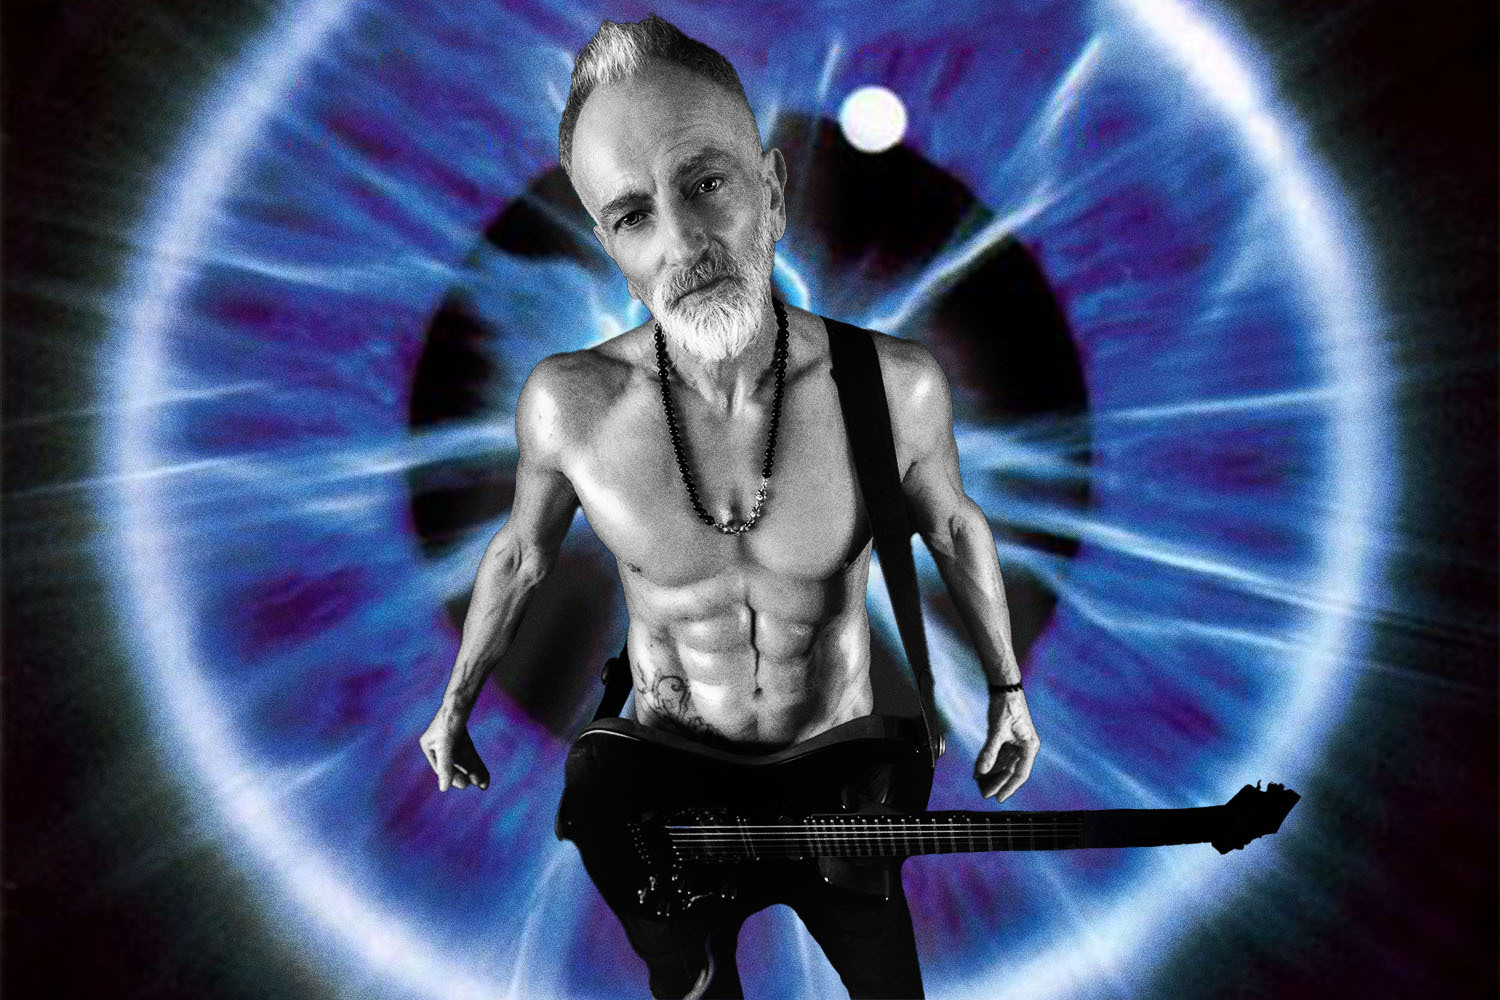 a mash-up pic of Def Leppard guitarist superimposed over the album cover of the band's 1992 album Adrenalize